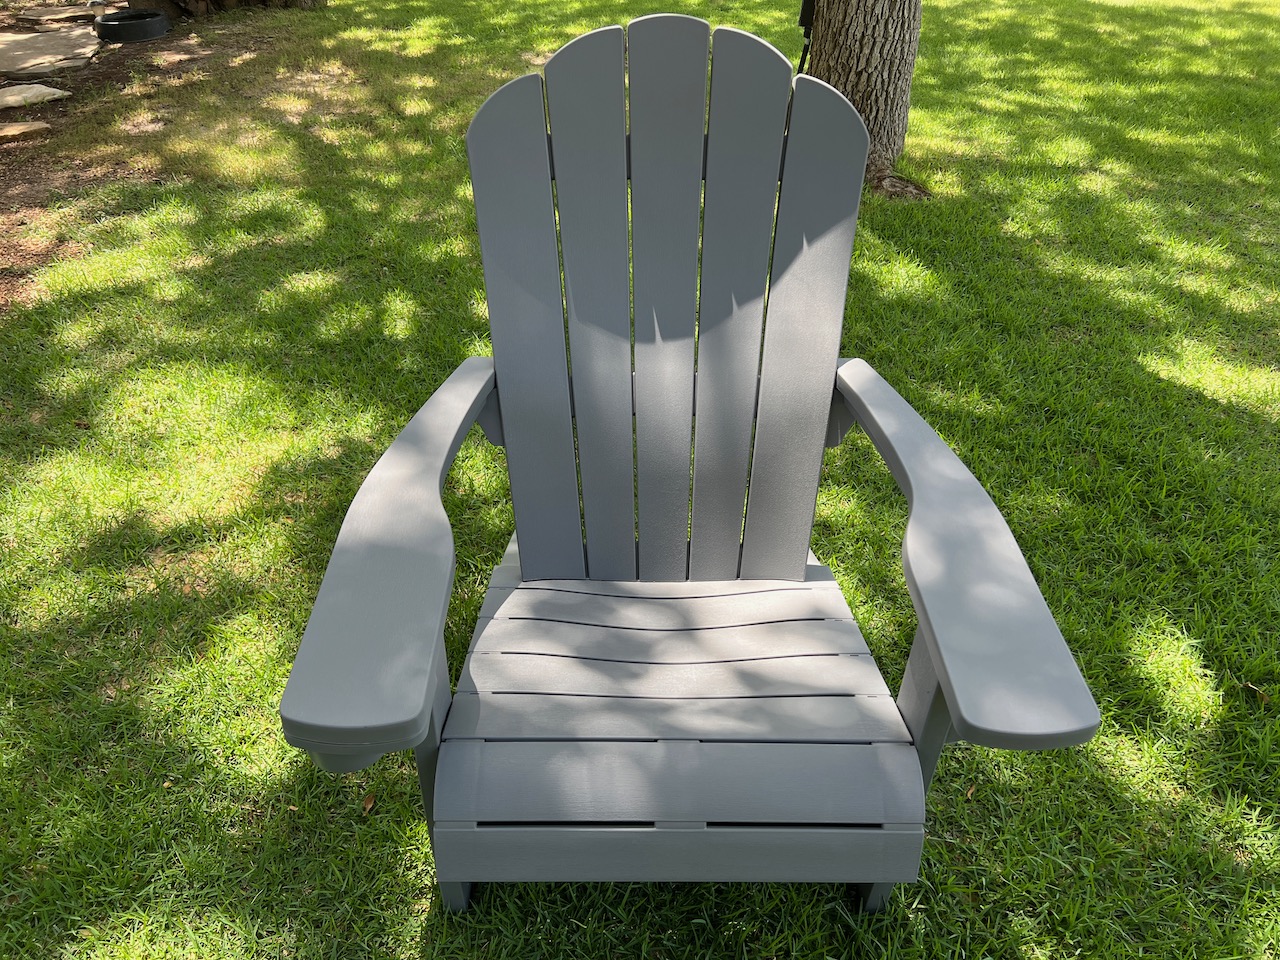 Featured Keter Resin Adirondack Chair Front.0ef80b8f83ed49a5a19dba8b4505c60f 